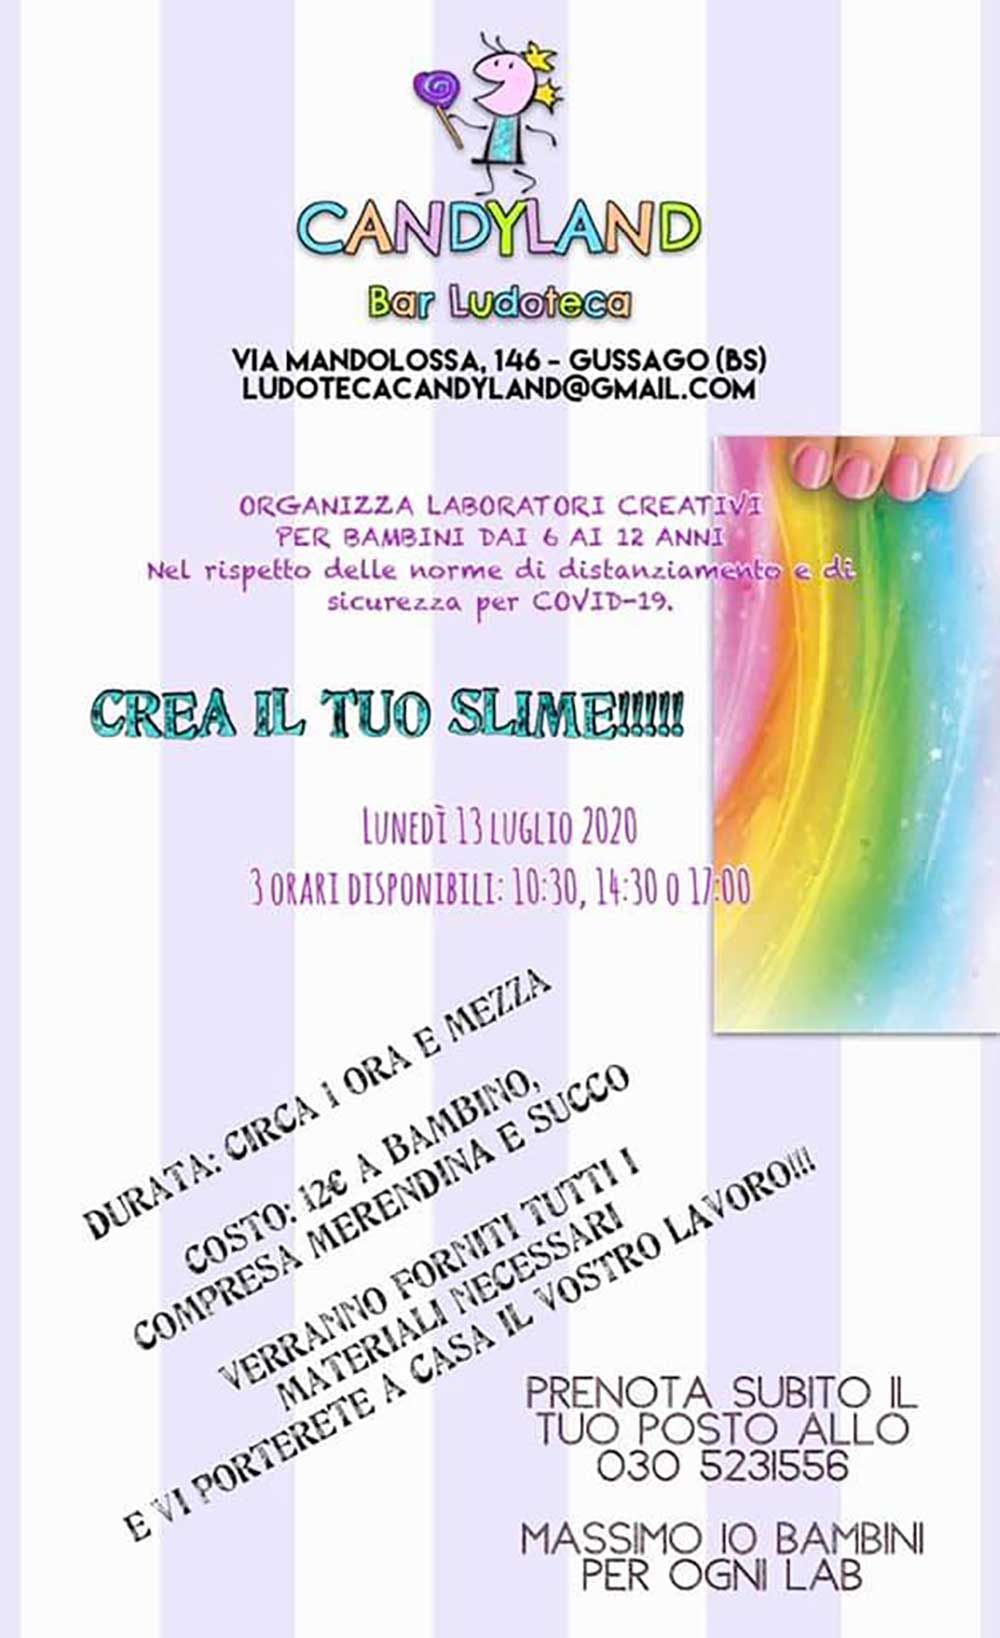 crea-il-tuo-slime-candyland-gussago